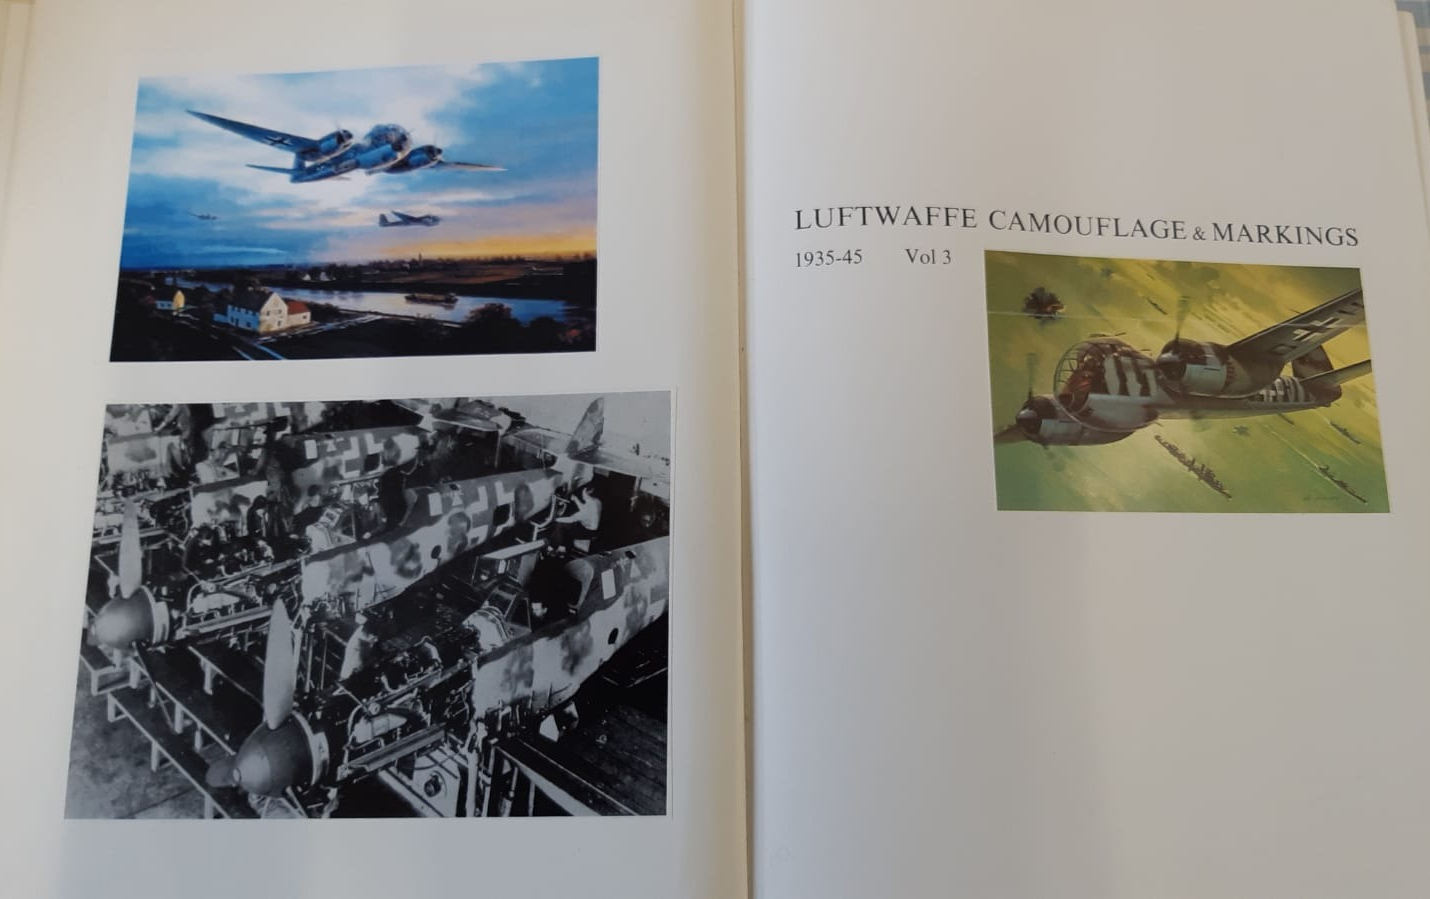 Luftwaffe camouflage and Markings Vol 3